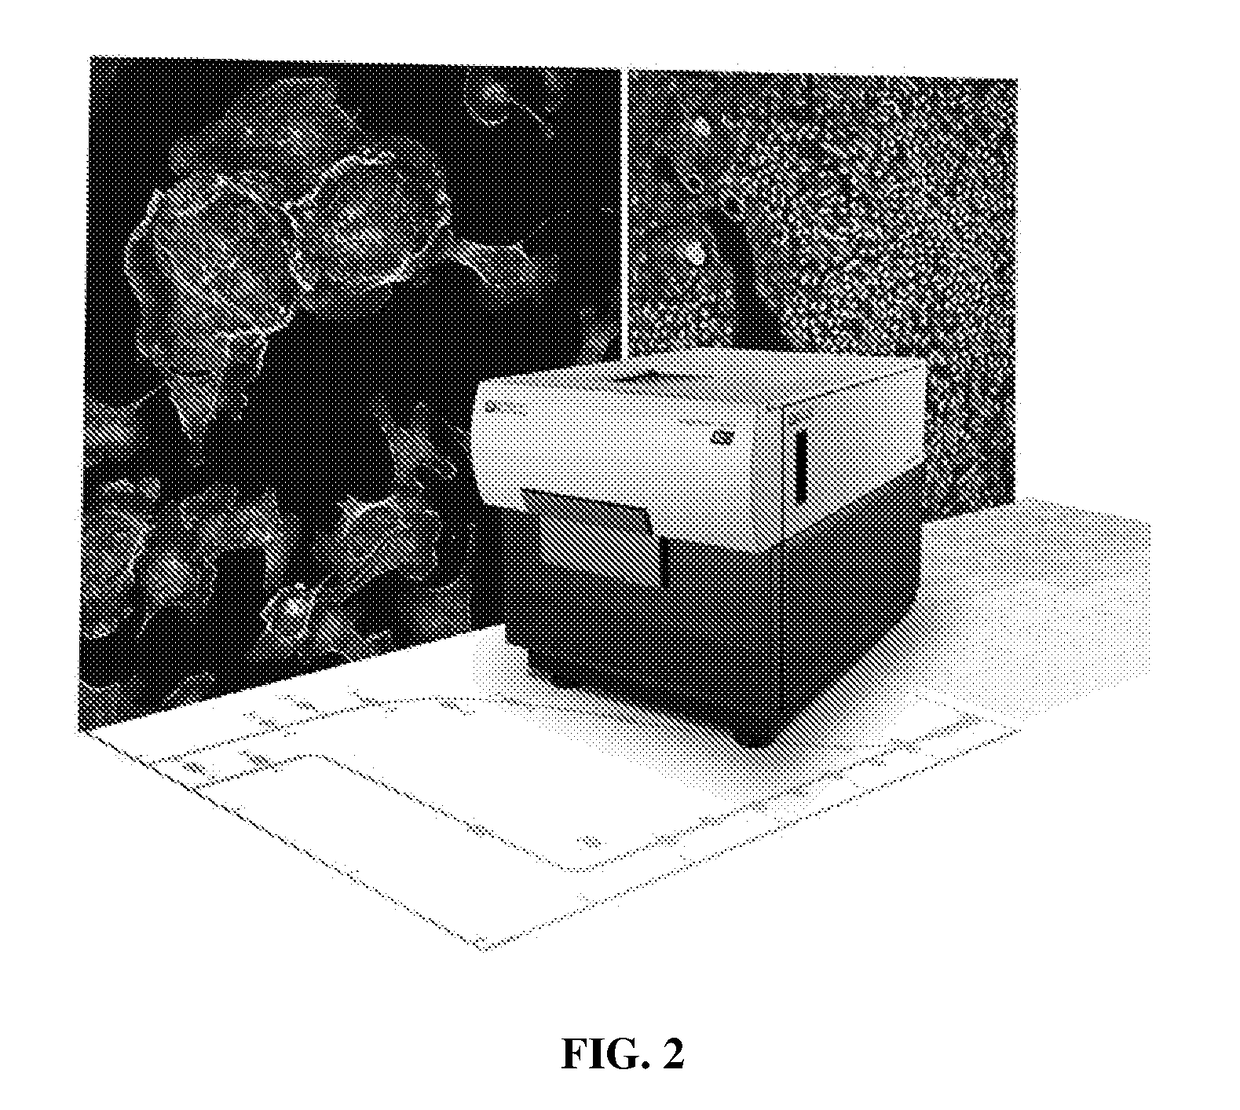 System and method for high throughput screening of cancer cells